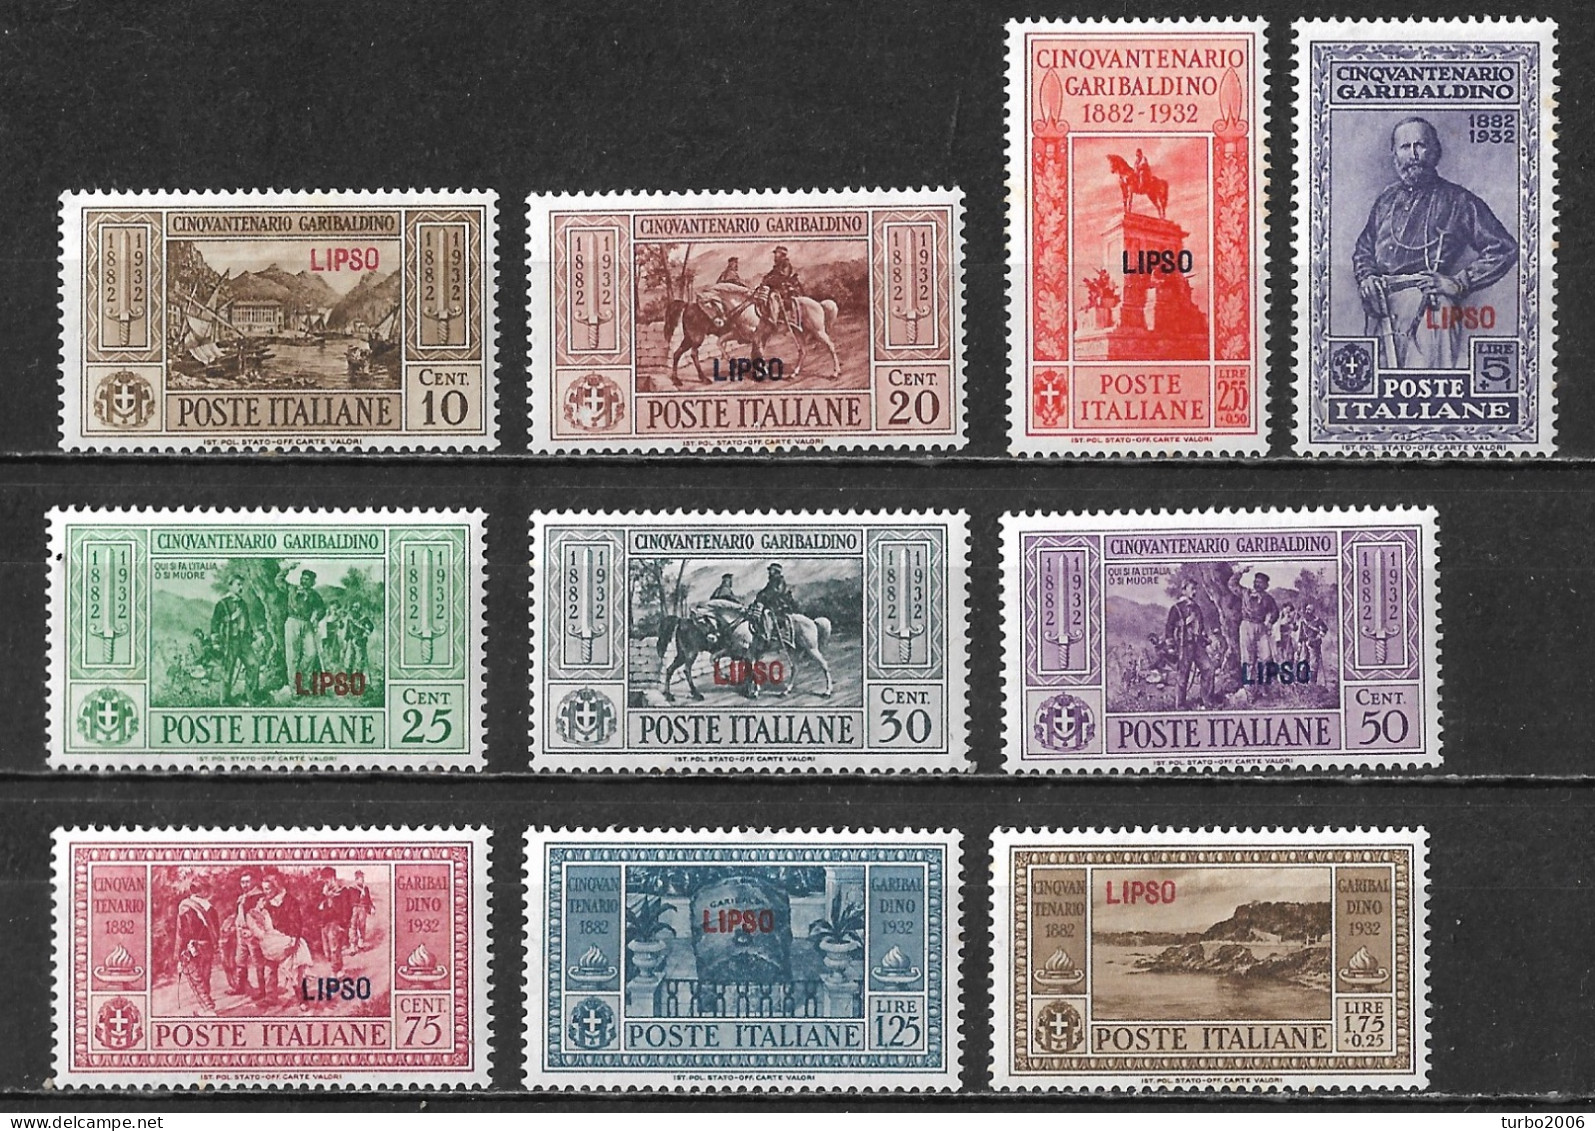 DODECANESE 1932 Stamps Of Italy Garibaldi Set With Overprint LIPSO Complete MH Set Vl. 17 / 26 - Dodekanesos